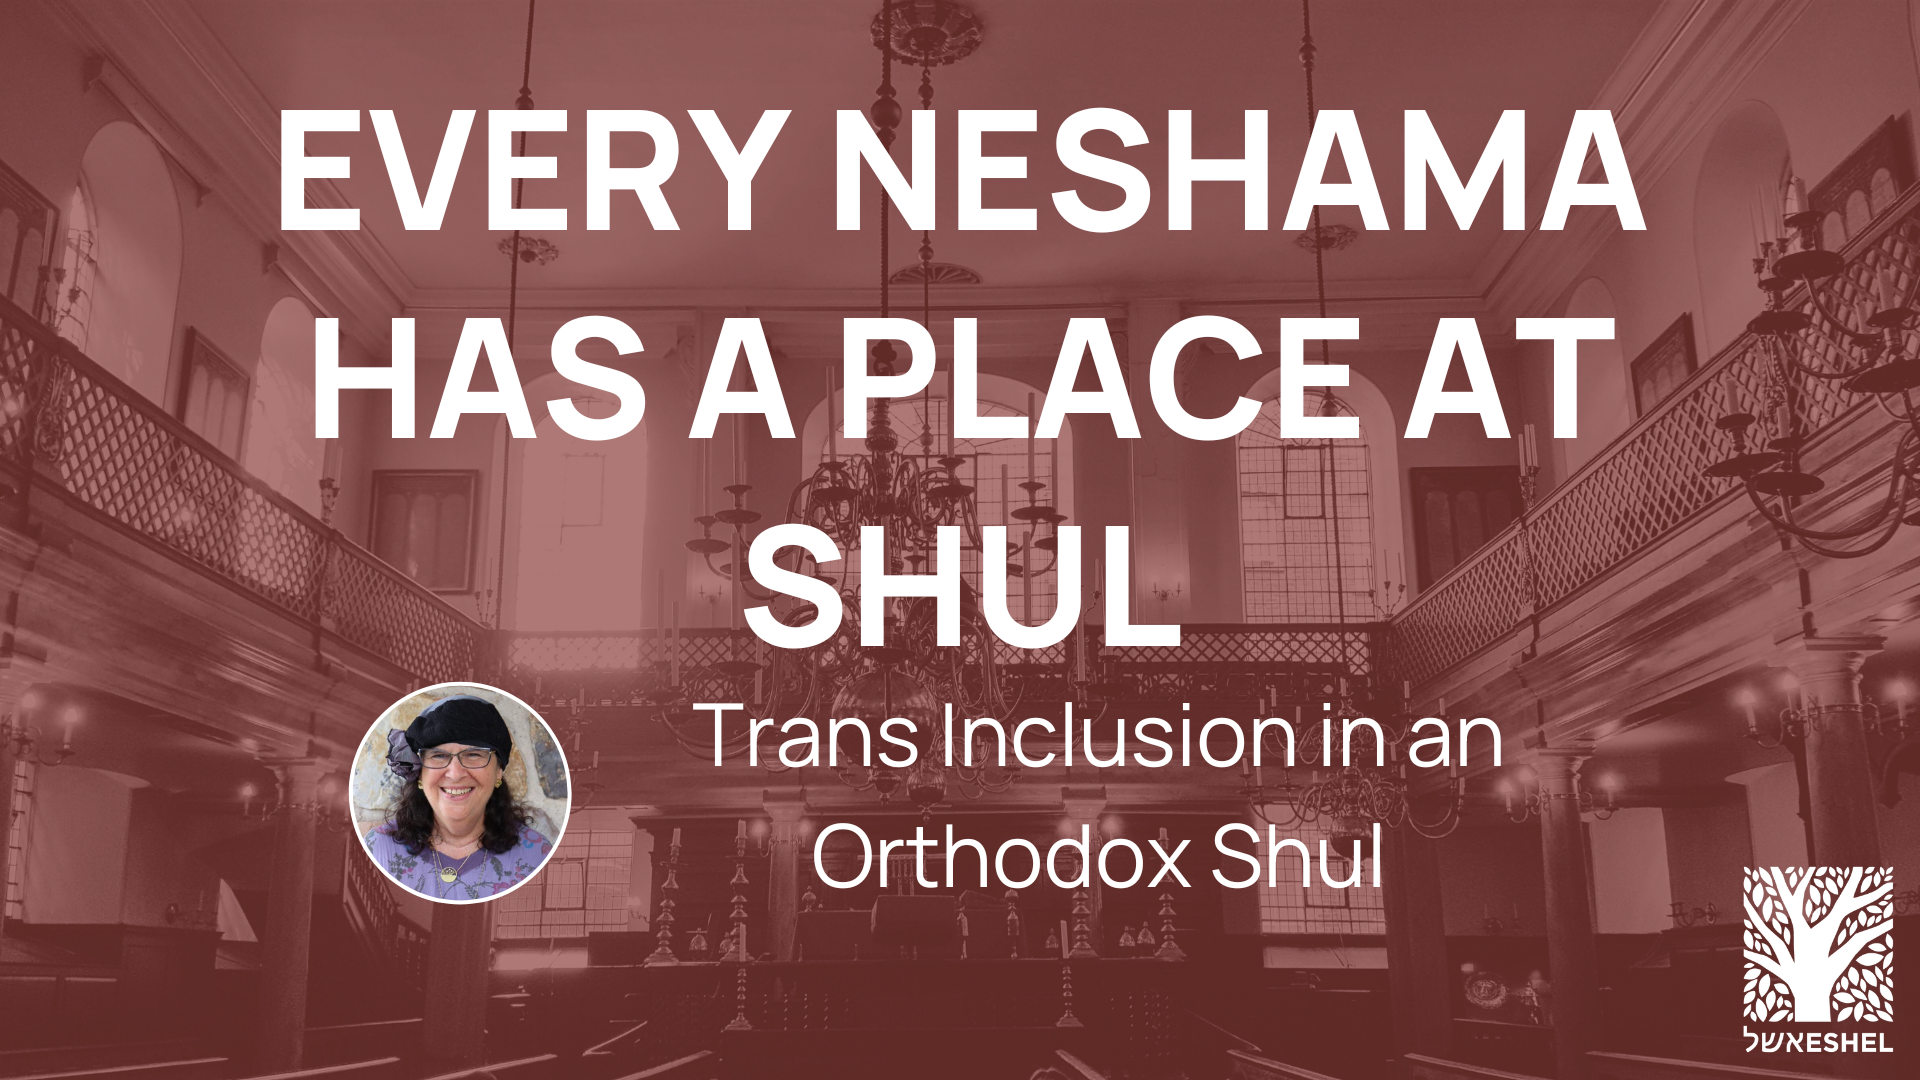 Every Neshama has a Place at Shul: Trans Inclusion in an Orthodox Shul